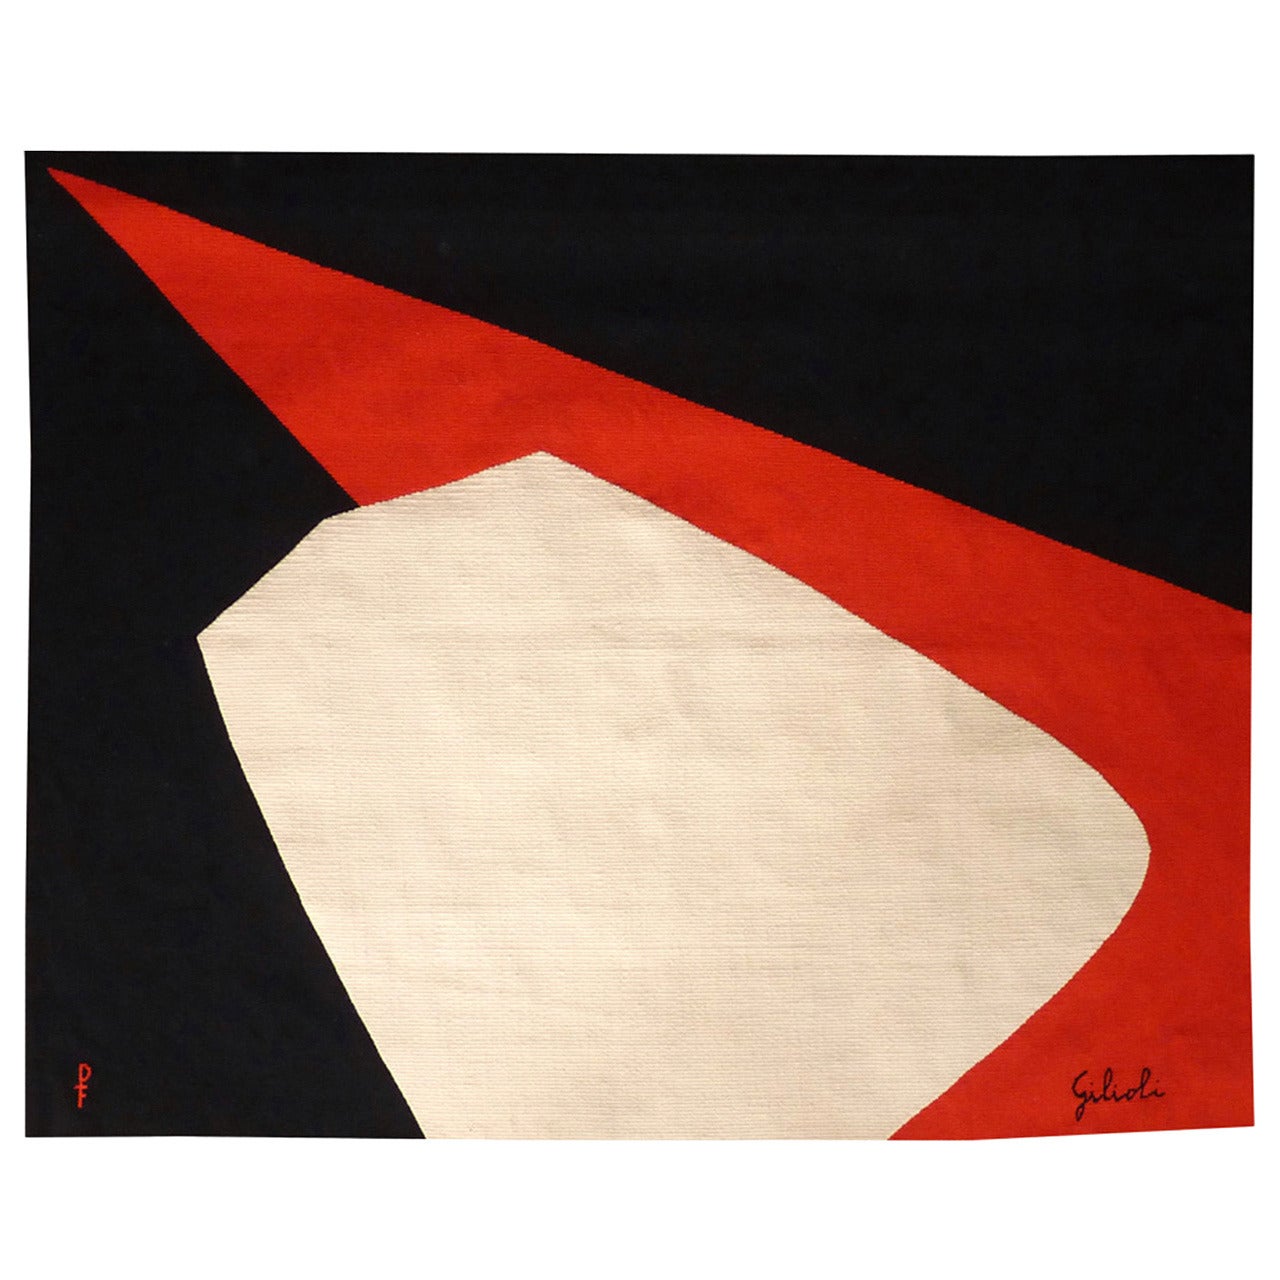 Circa 1970 "Le Galet" Tapestry from Emile Giloili For Sale